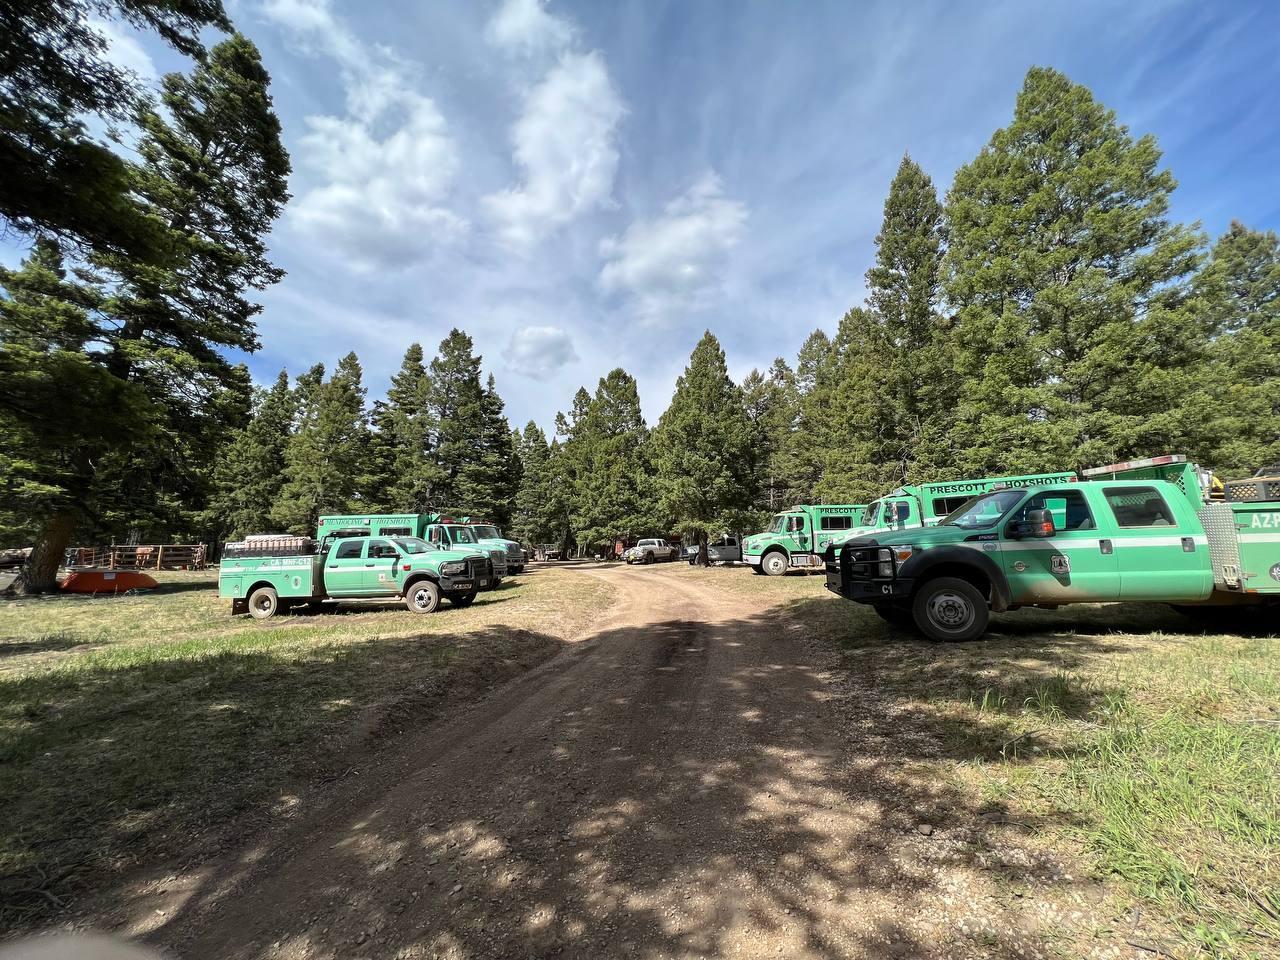 Green fire trucks and hotshot crew buggies parked in campground with trees and cloudy, blue sky in background